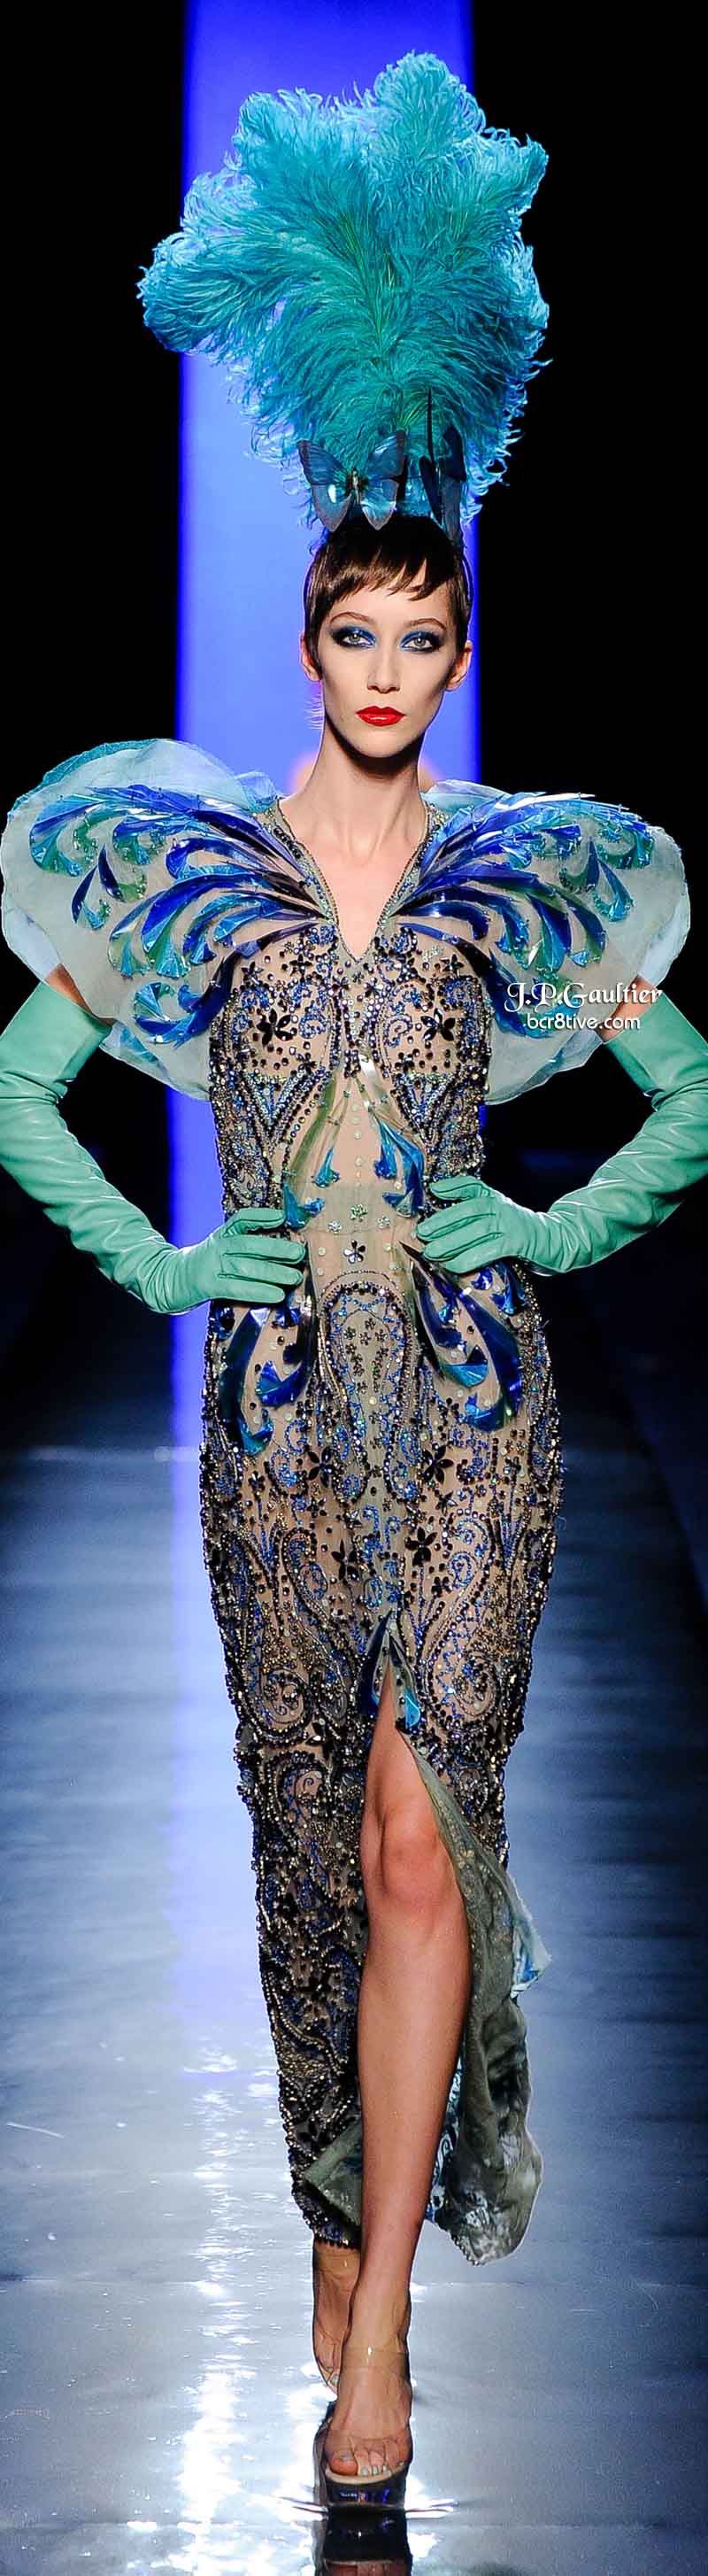 Jean Paul Gaultier Spring 2014 Couture – Be Creative